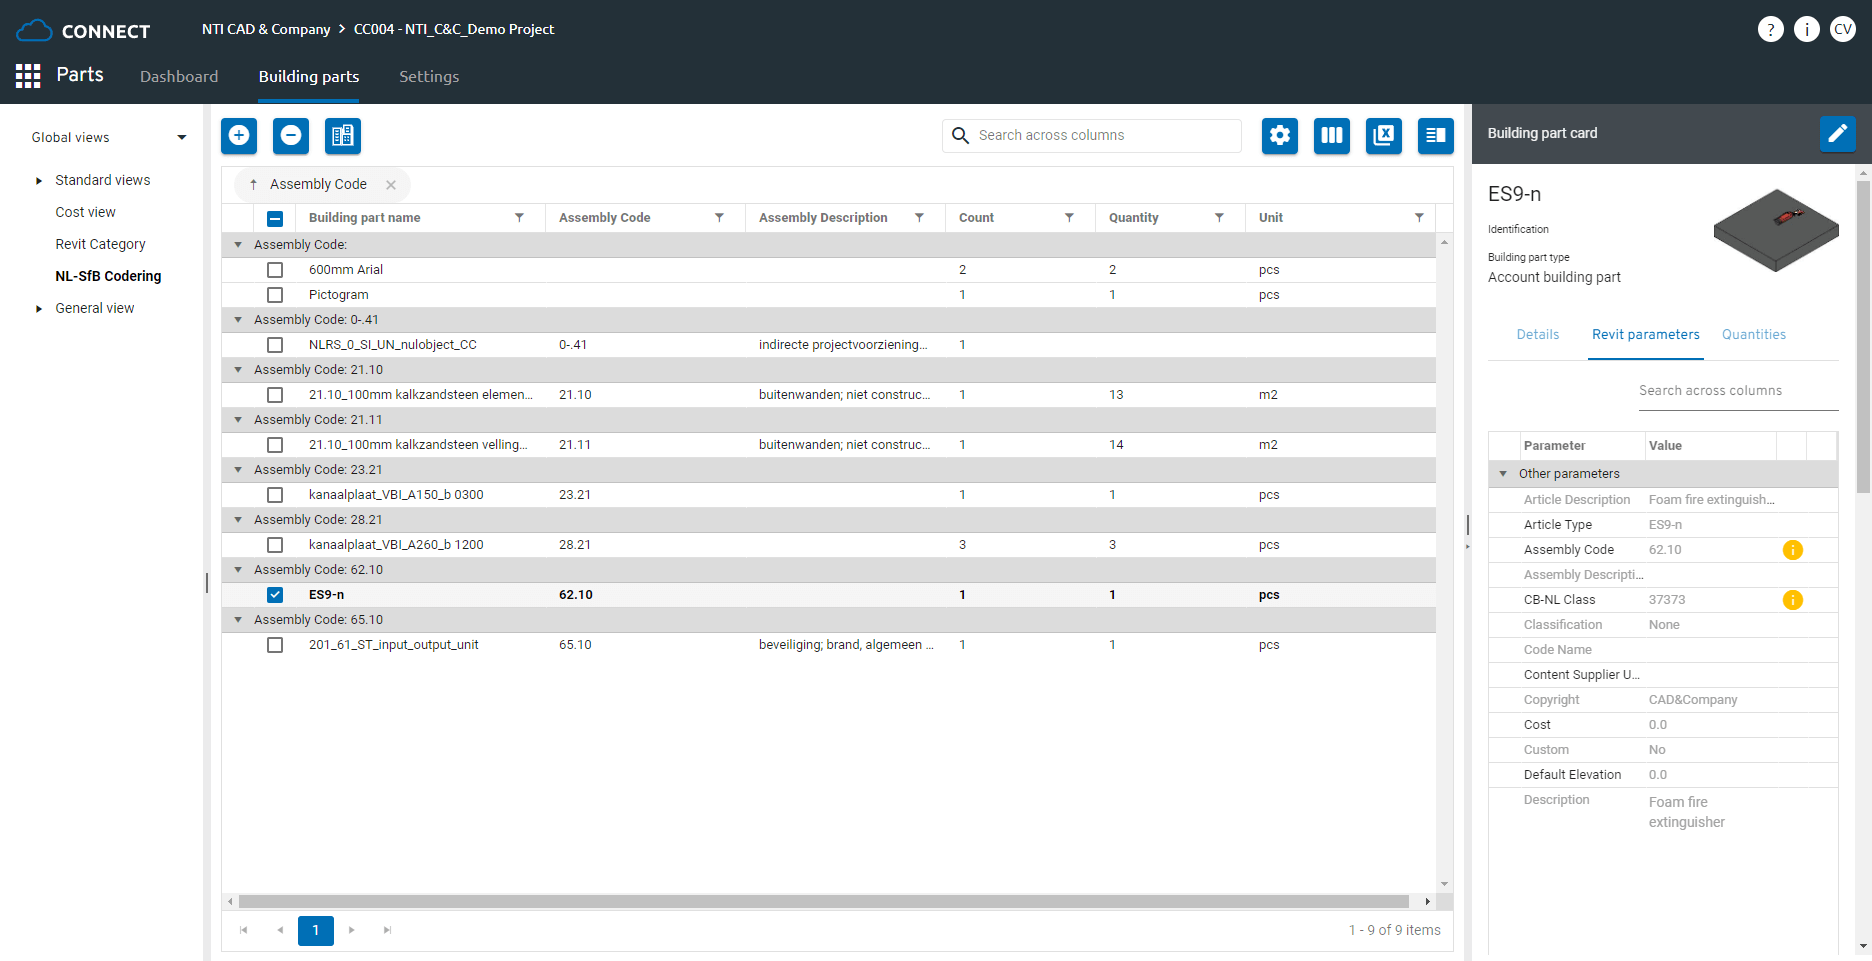 NTI CONNECT PARTS User Interface-2